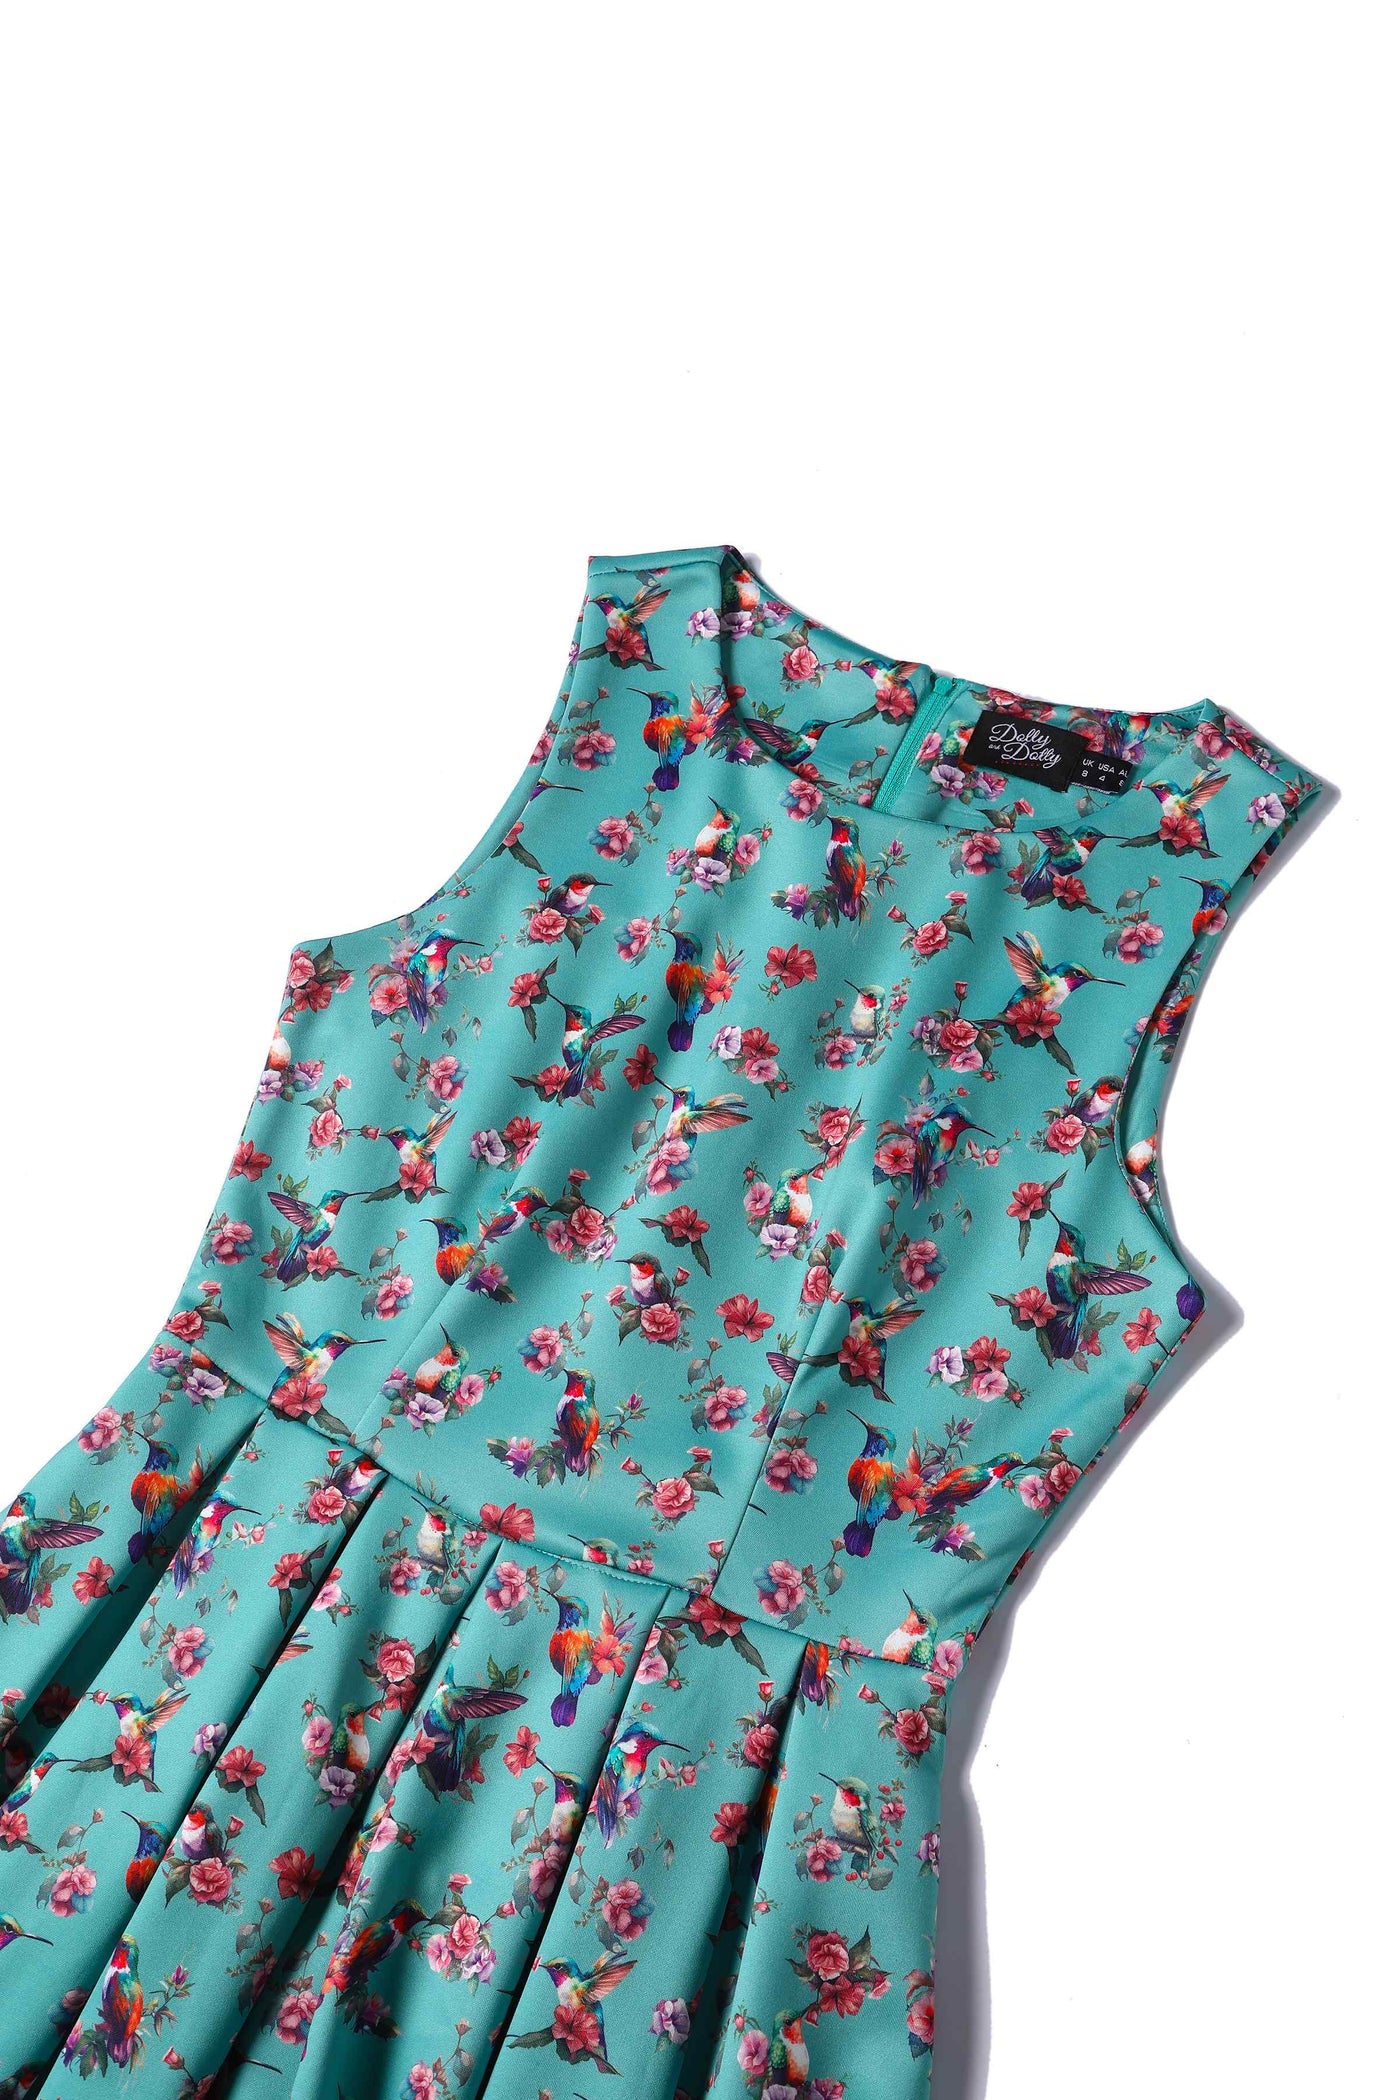 Close up View of Turquoise Hummingbird Formal Swing Dress